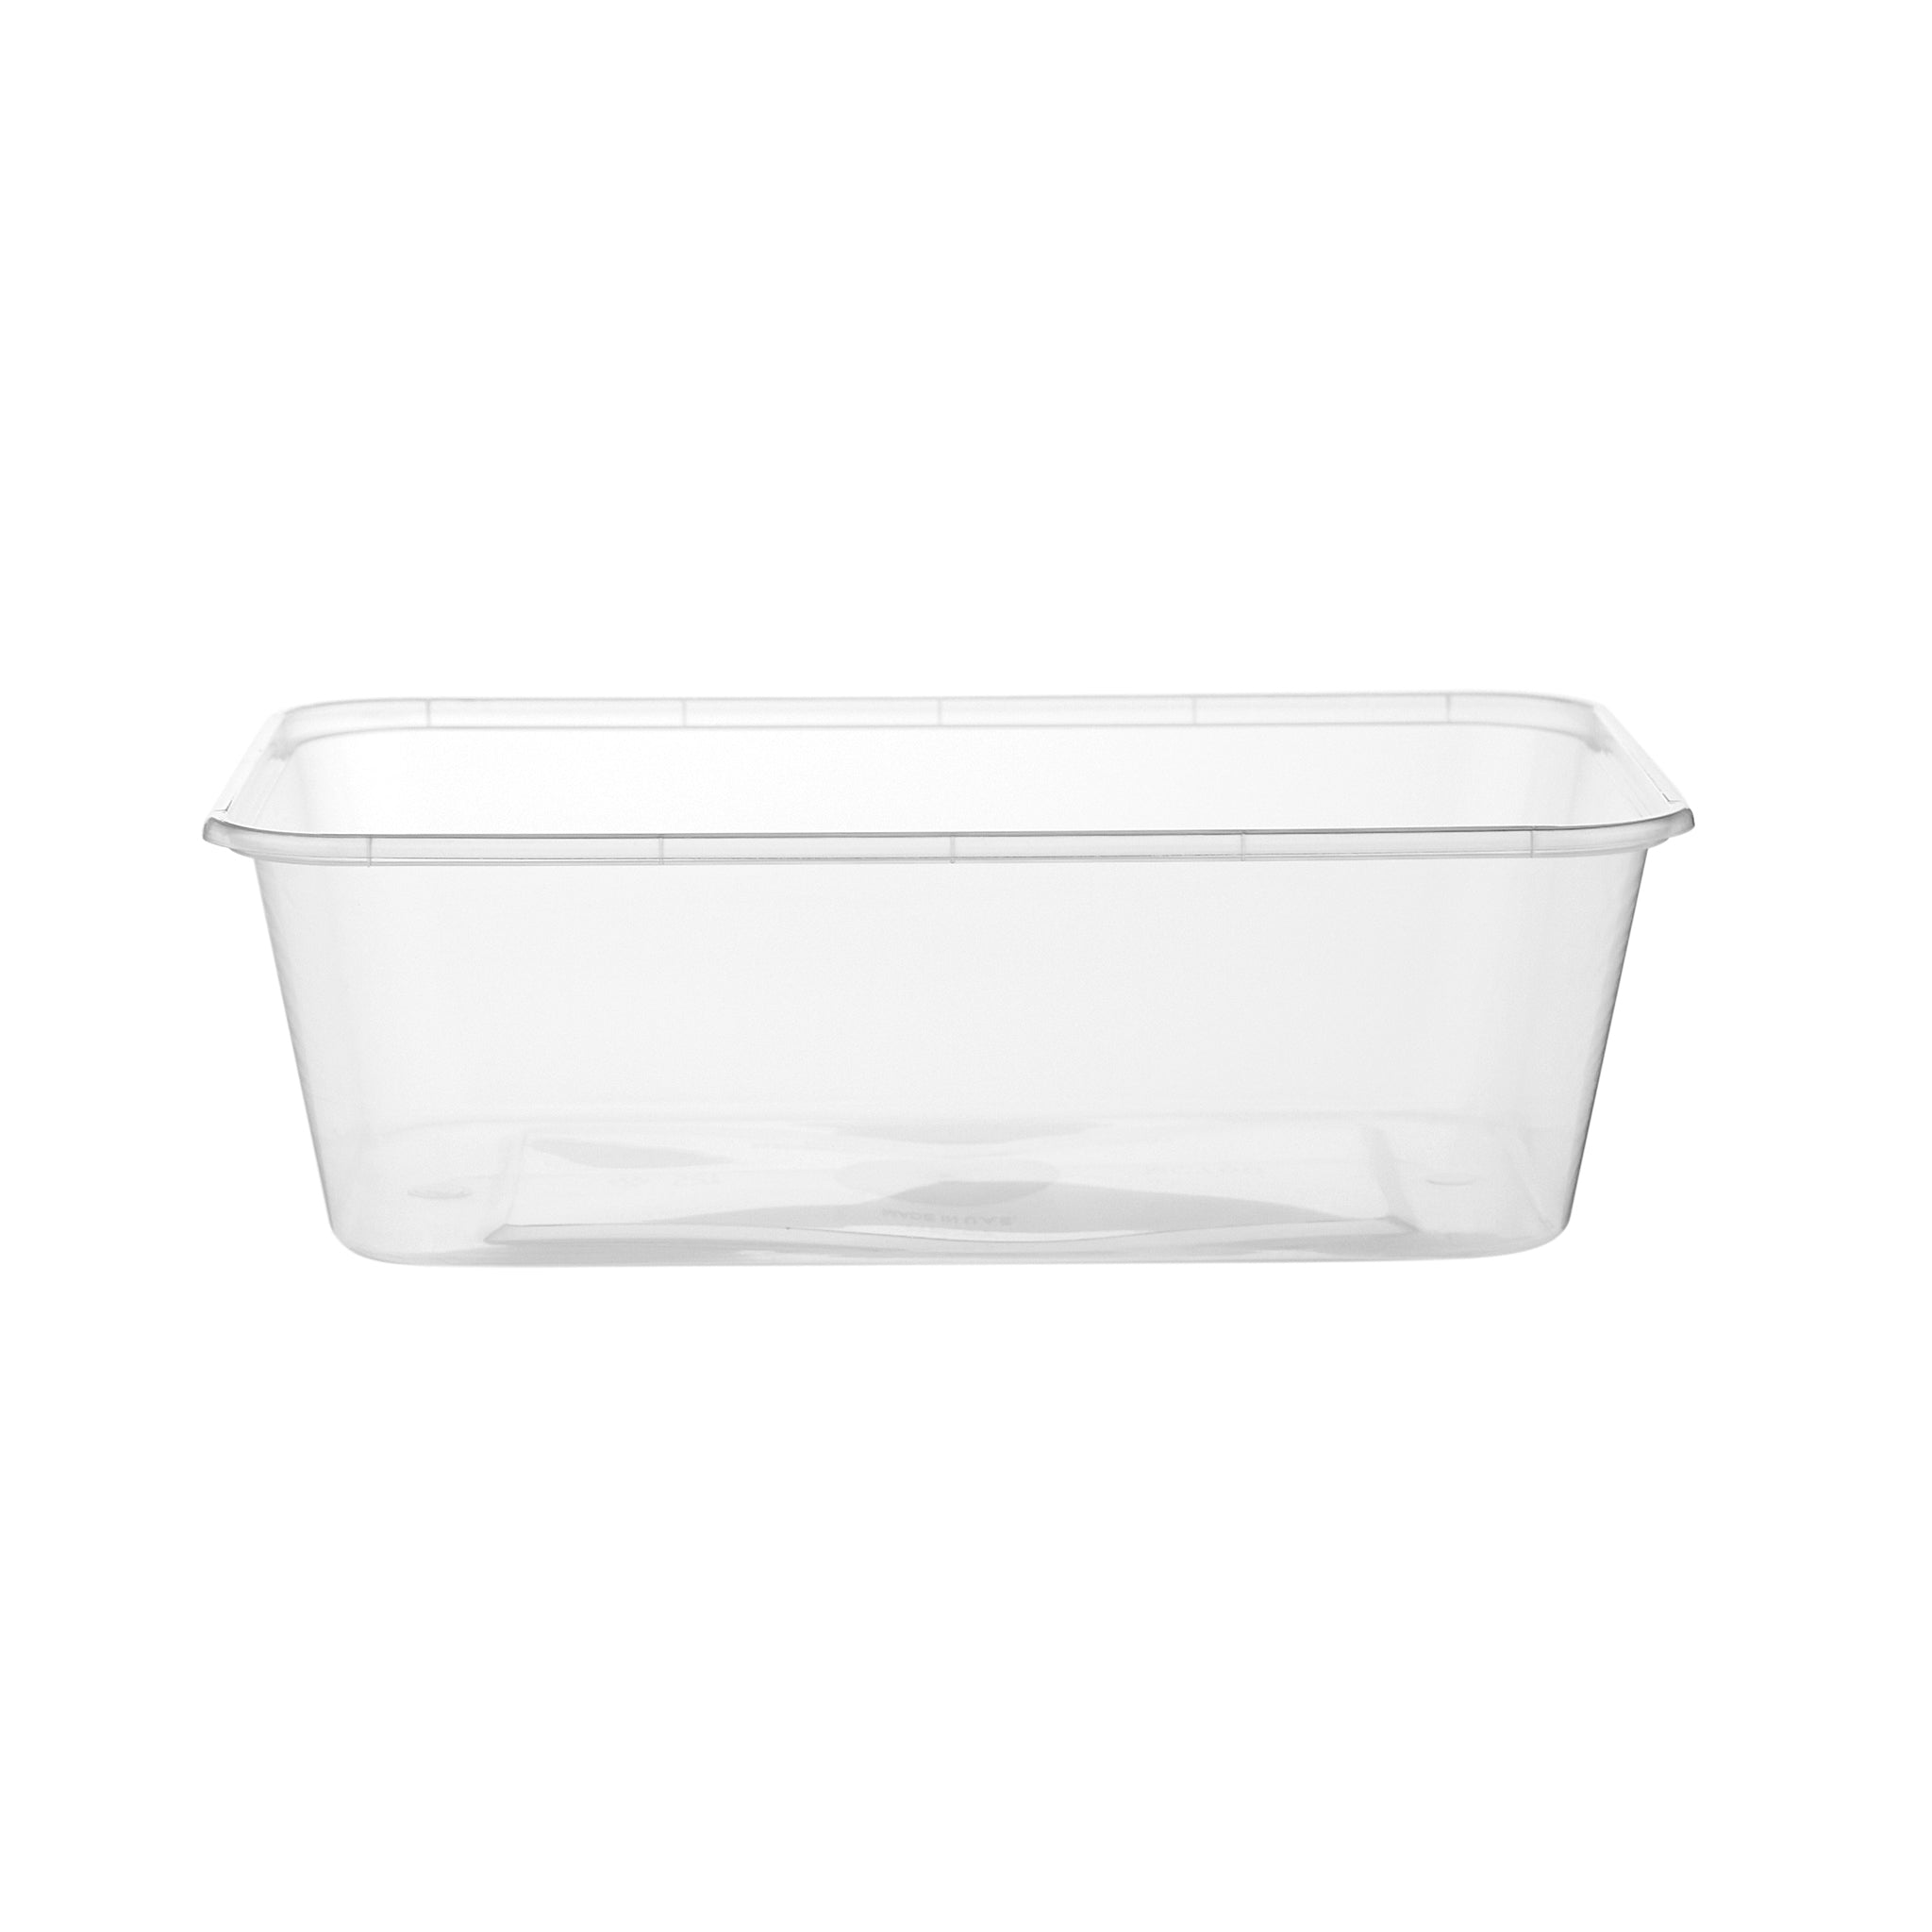 50 x Rectangular 1000ml Microwave Plastic Containers Takeaway Food